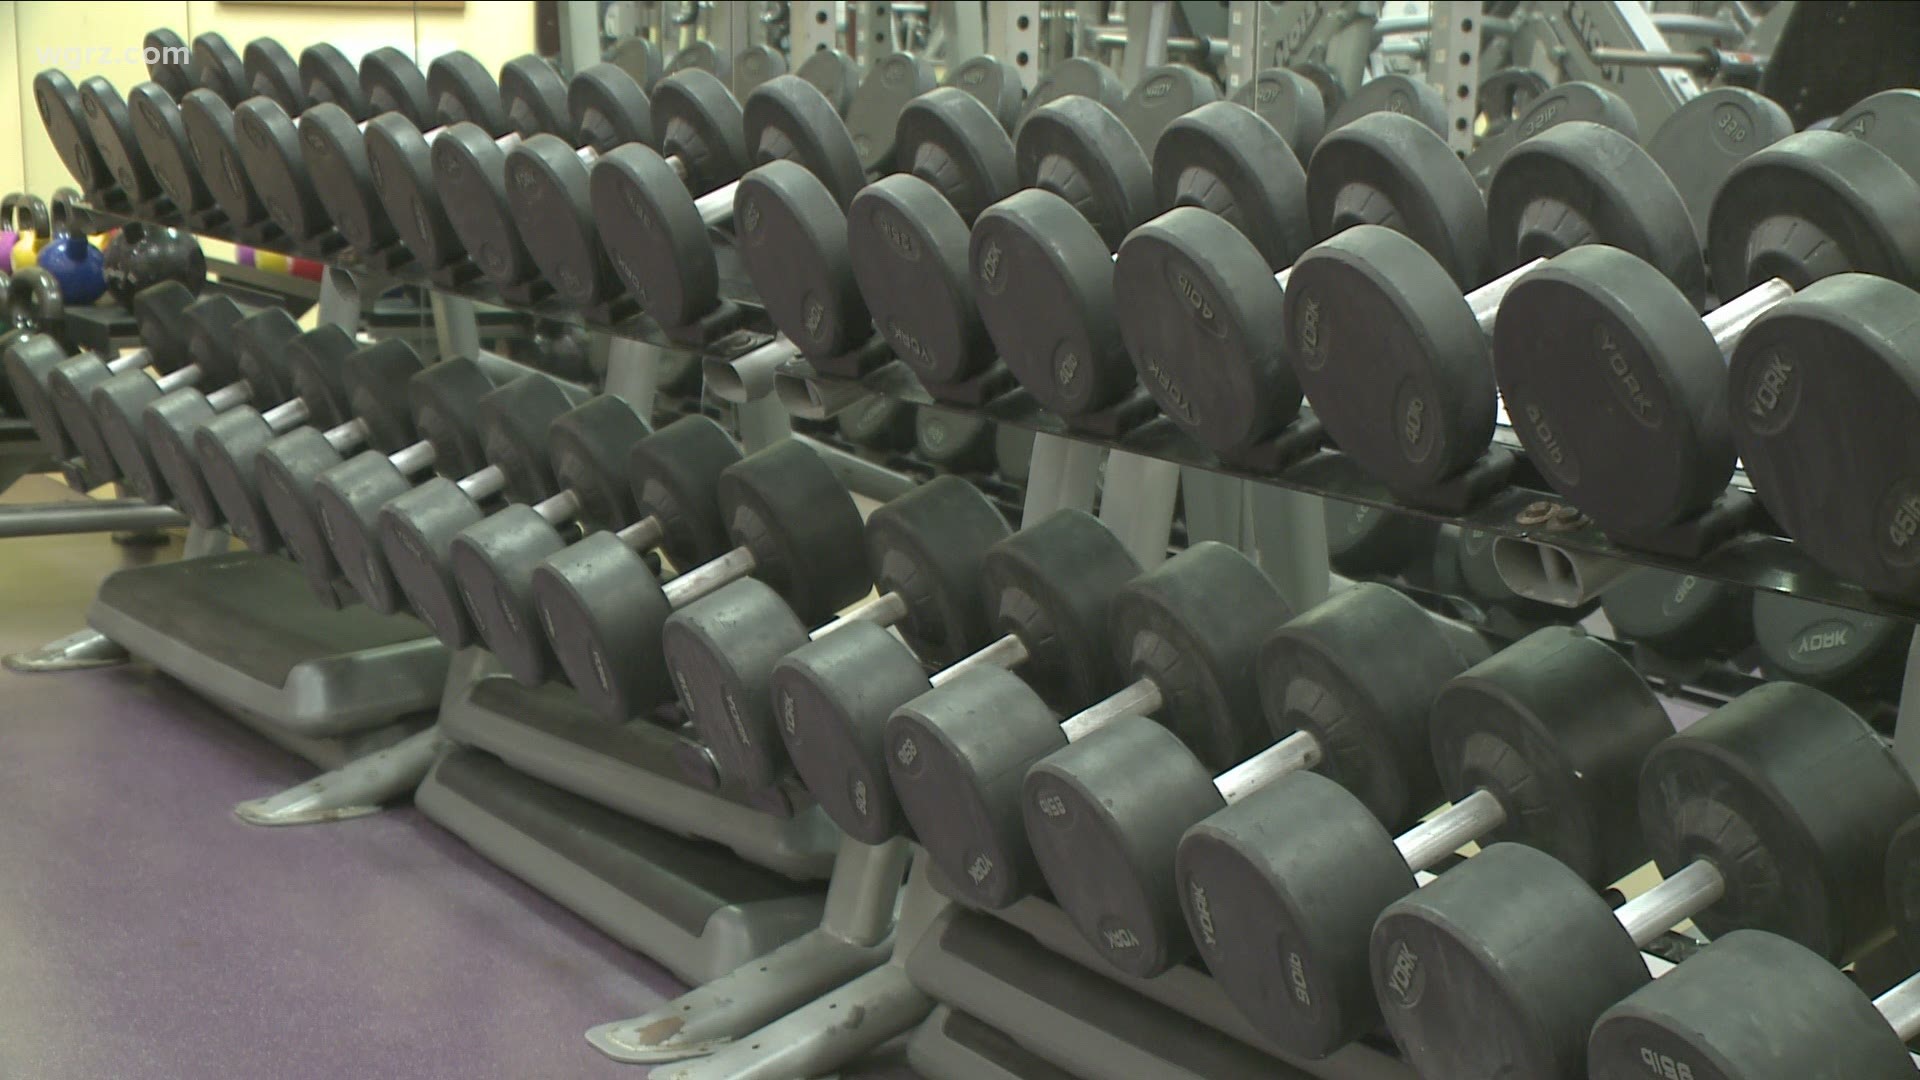 Starting Friday, restaurants in Western New York will be able to have more people dine inside. A group of gym owners are calling on the governor to do the same.